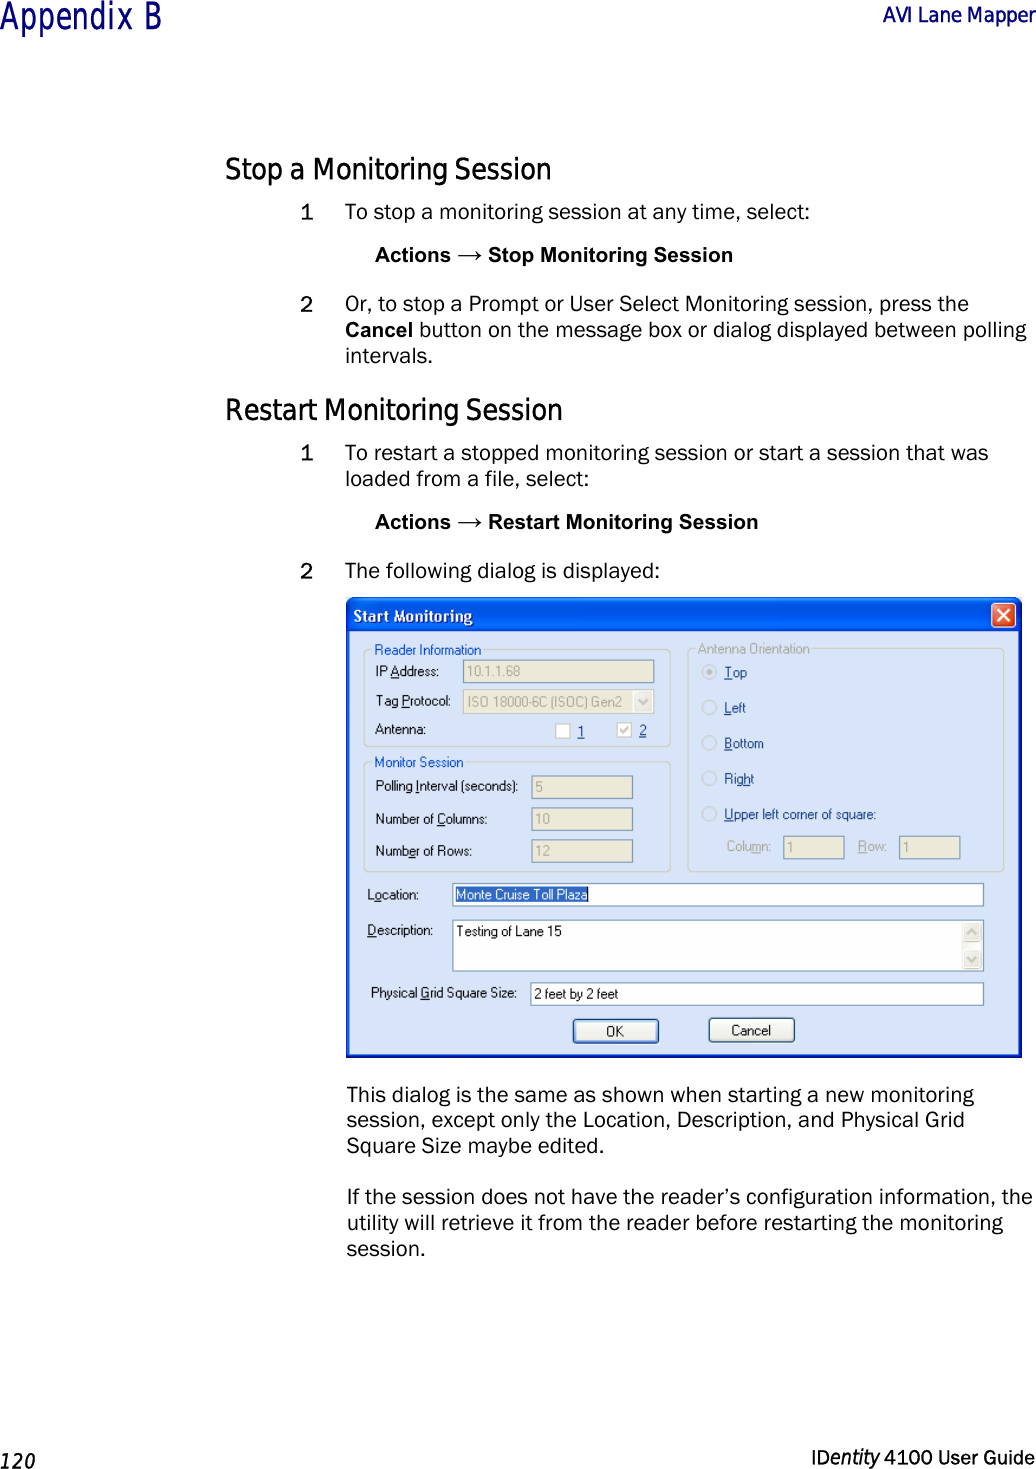  Appendix B  AVI Lane Mapper   120  IDentity 4100 User Guide  Stop a Monitoring Session 1 To stop a monitoring session at any time, select: Actions → Stop Monitoring Session 2 Or, to stop a Prompt or User Select Monitoring session, press the Cancel button on the message box or dialog displayed between polling intervals. Restart Monitoring Session 1 To restart a stopped monitoring session or start a session that was loaded from a file, select: Actions → Restart Monitoring Session 2 The following dialog is displayed:  This dialog is the same as shown when starting a new monitoring session, except only the Location, Description, and Physical Grid Square Size maybe edited. If the session does not have the reader’s configuration information, the utility will retrieve it from the reader before restarting the monitoring session. 